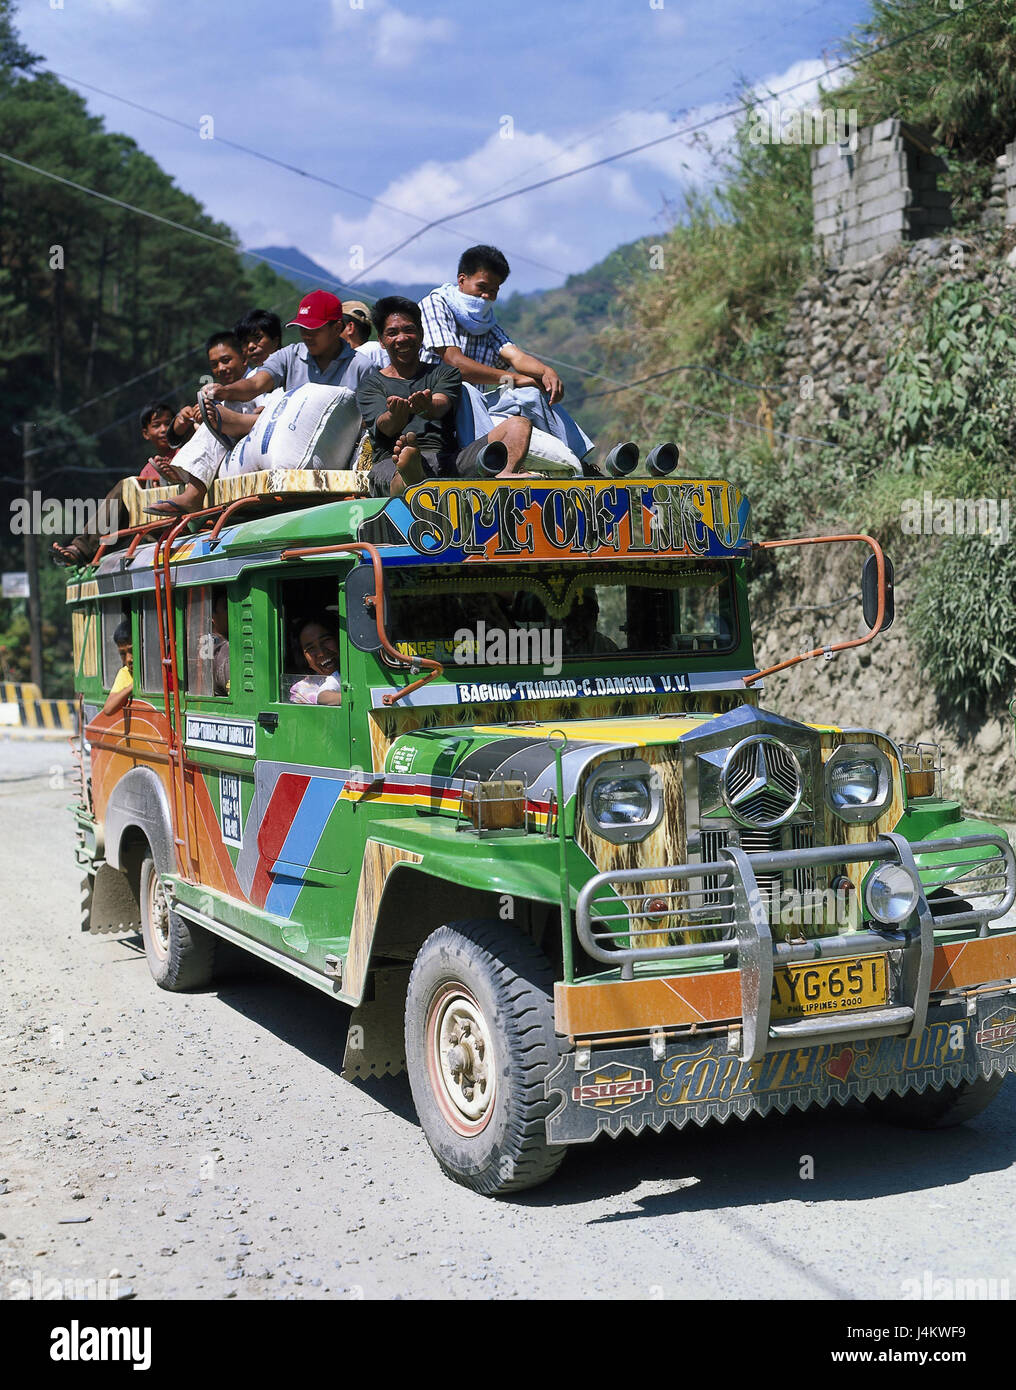 The Philippines, Banawe, mountain road, Jeepney South-East Asia, Malay archipelago, island group, island, Central Cordillera, mountain landscape, mountains, street, means of transportation, jeep, publicly, transport, promotion, transportation of human beings, tradition Stock Photo